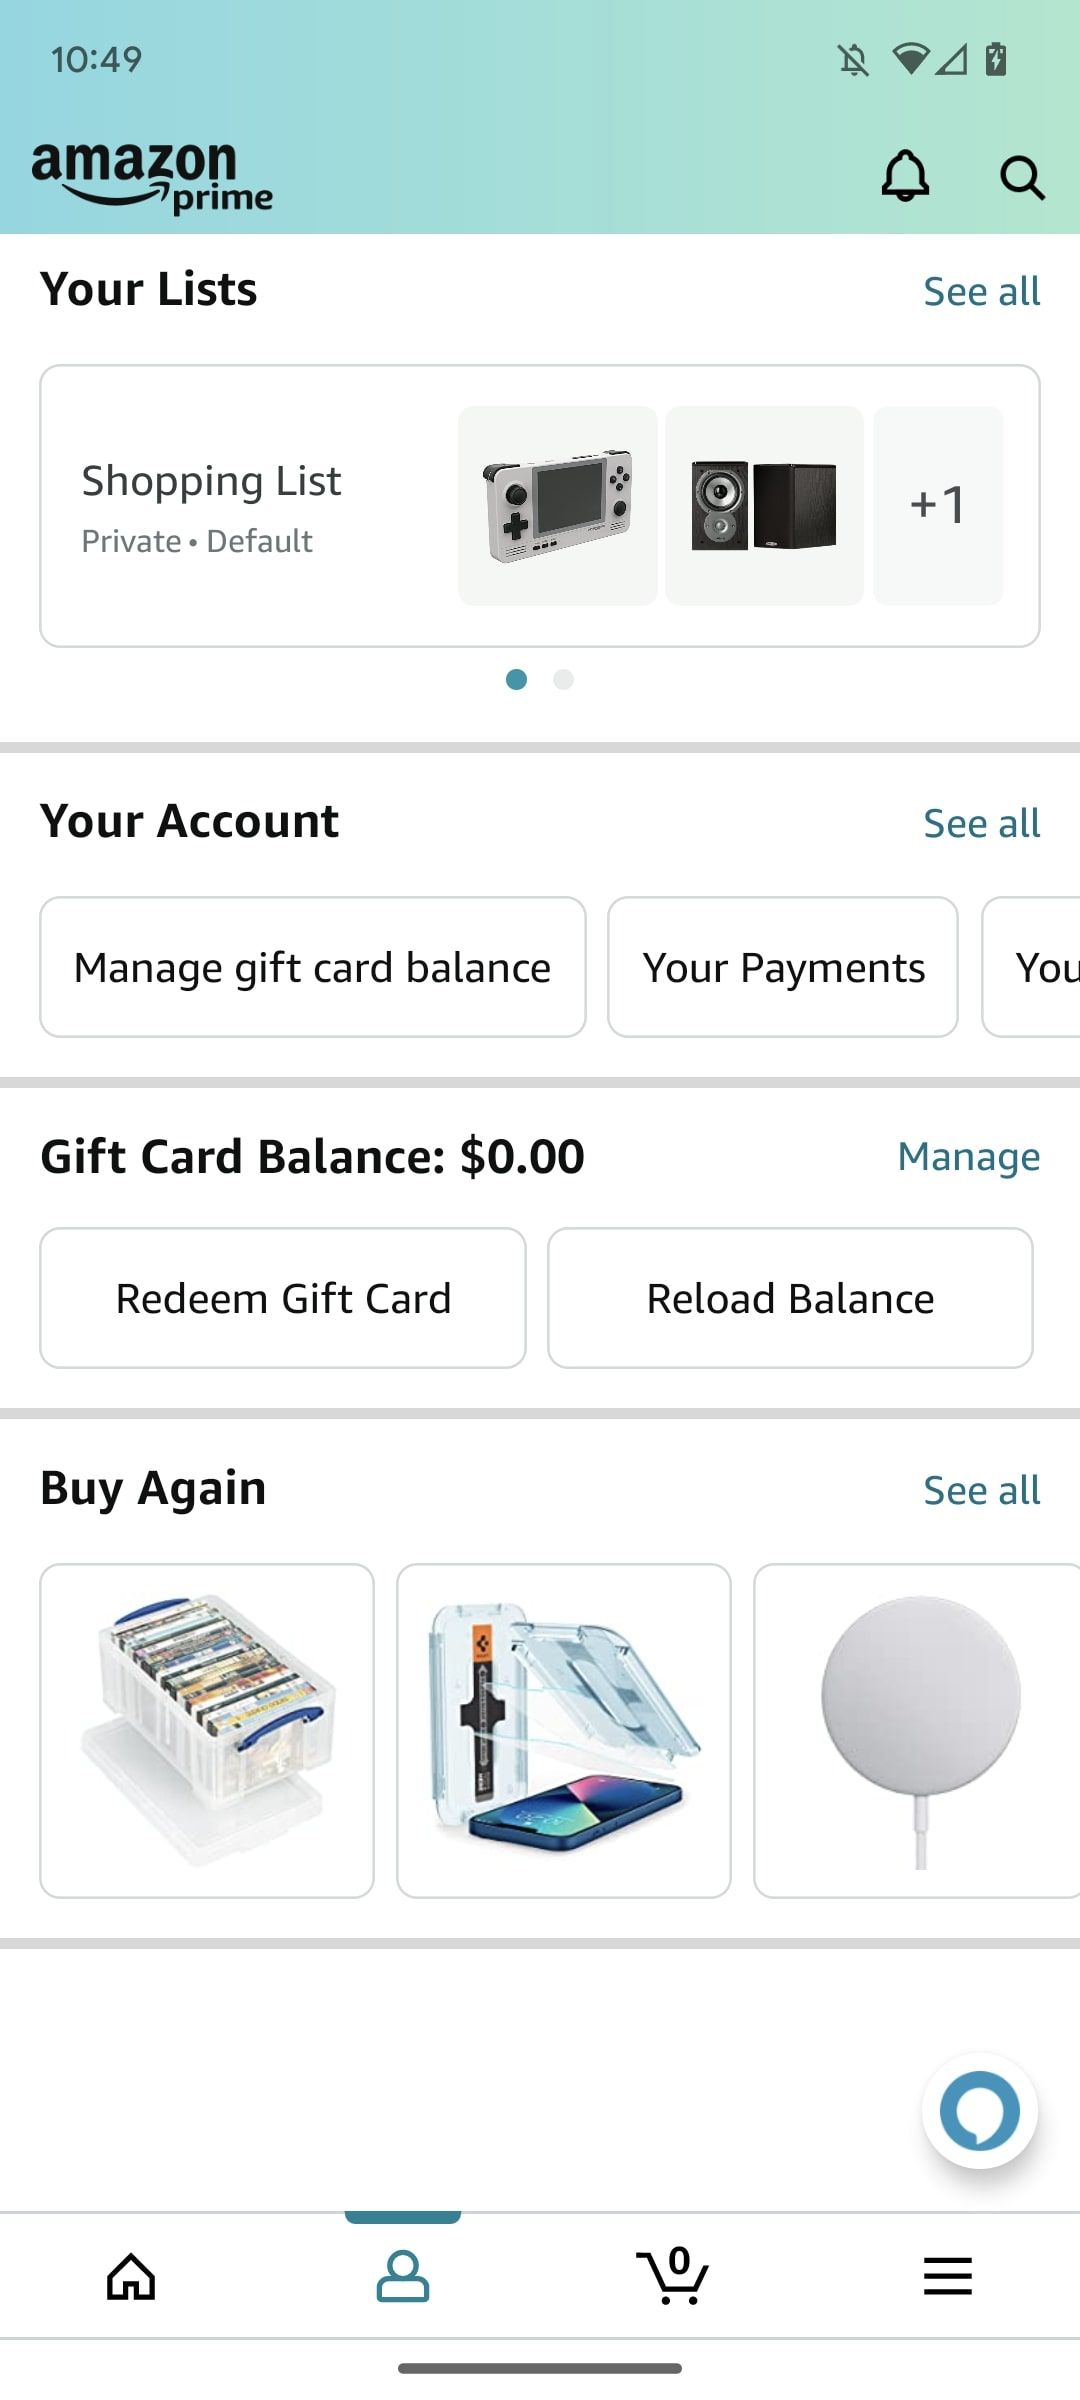 How To Check Amazon Gift Card Balance (A Step-By-Step Guide)